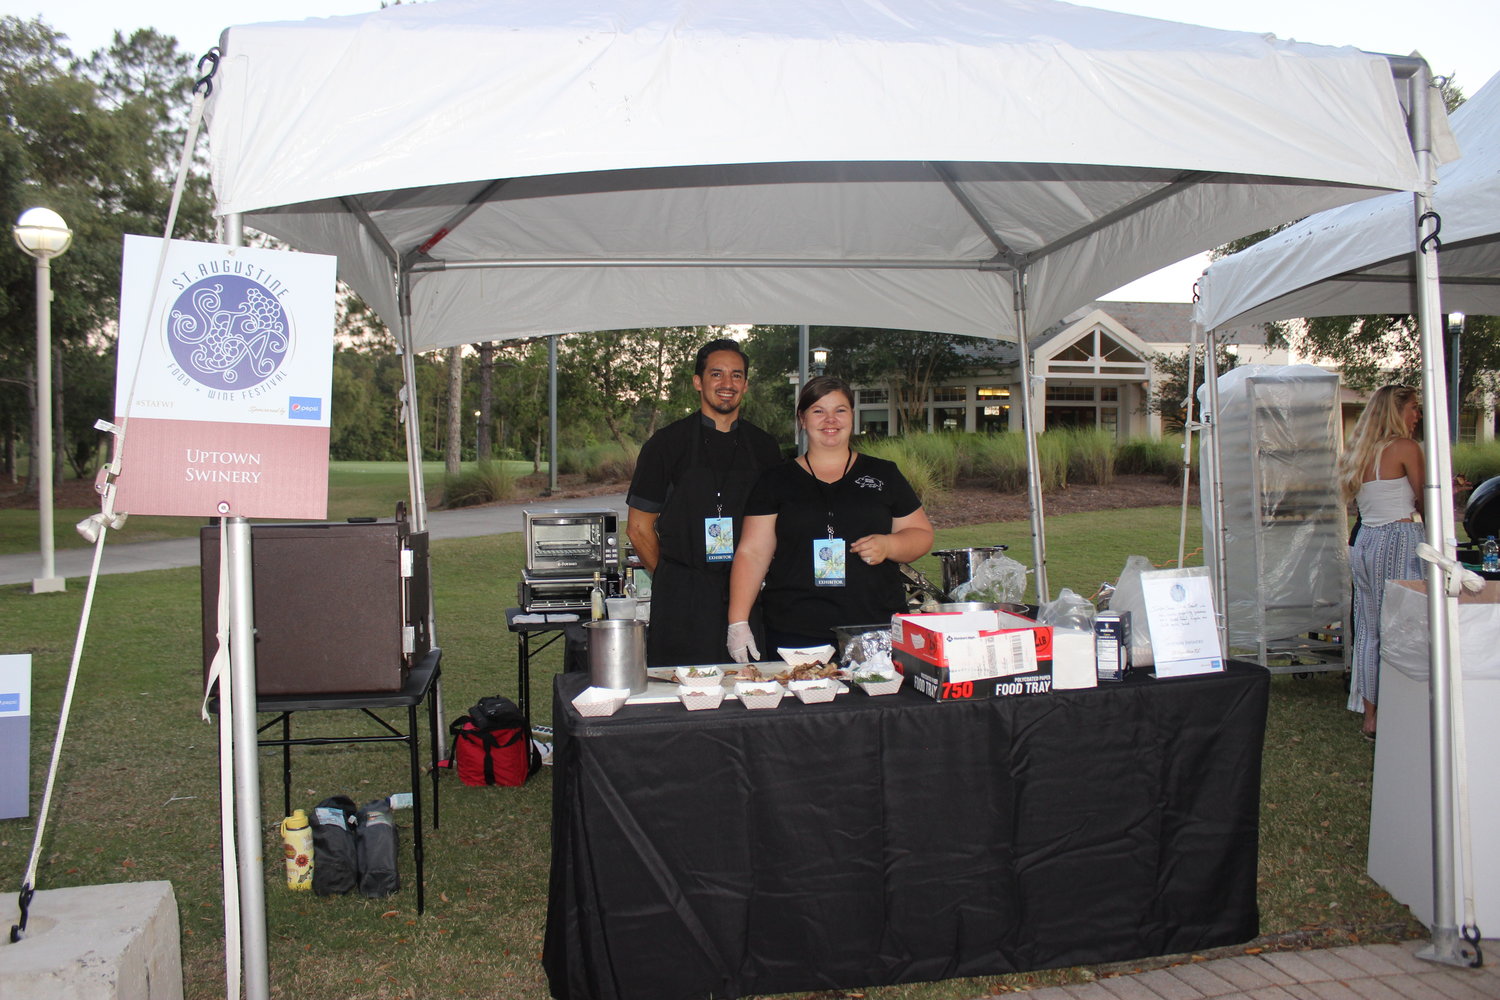 Representatives from Uptown Swinery serve up barbecue during last year’s Smoke on the Walk event.